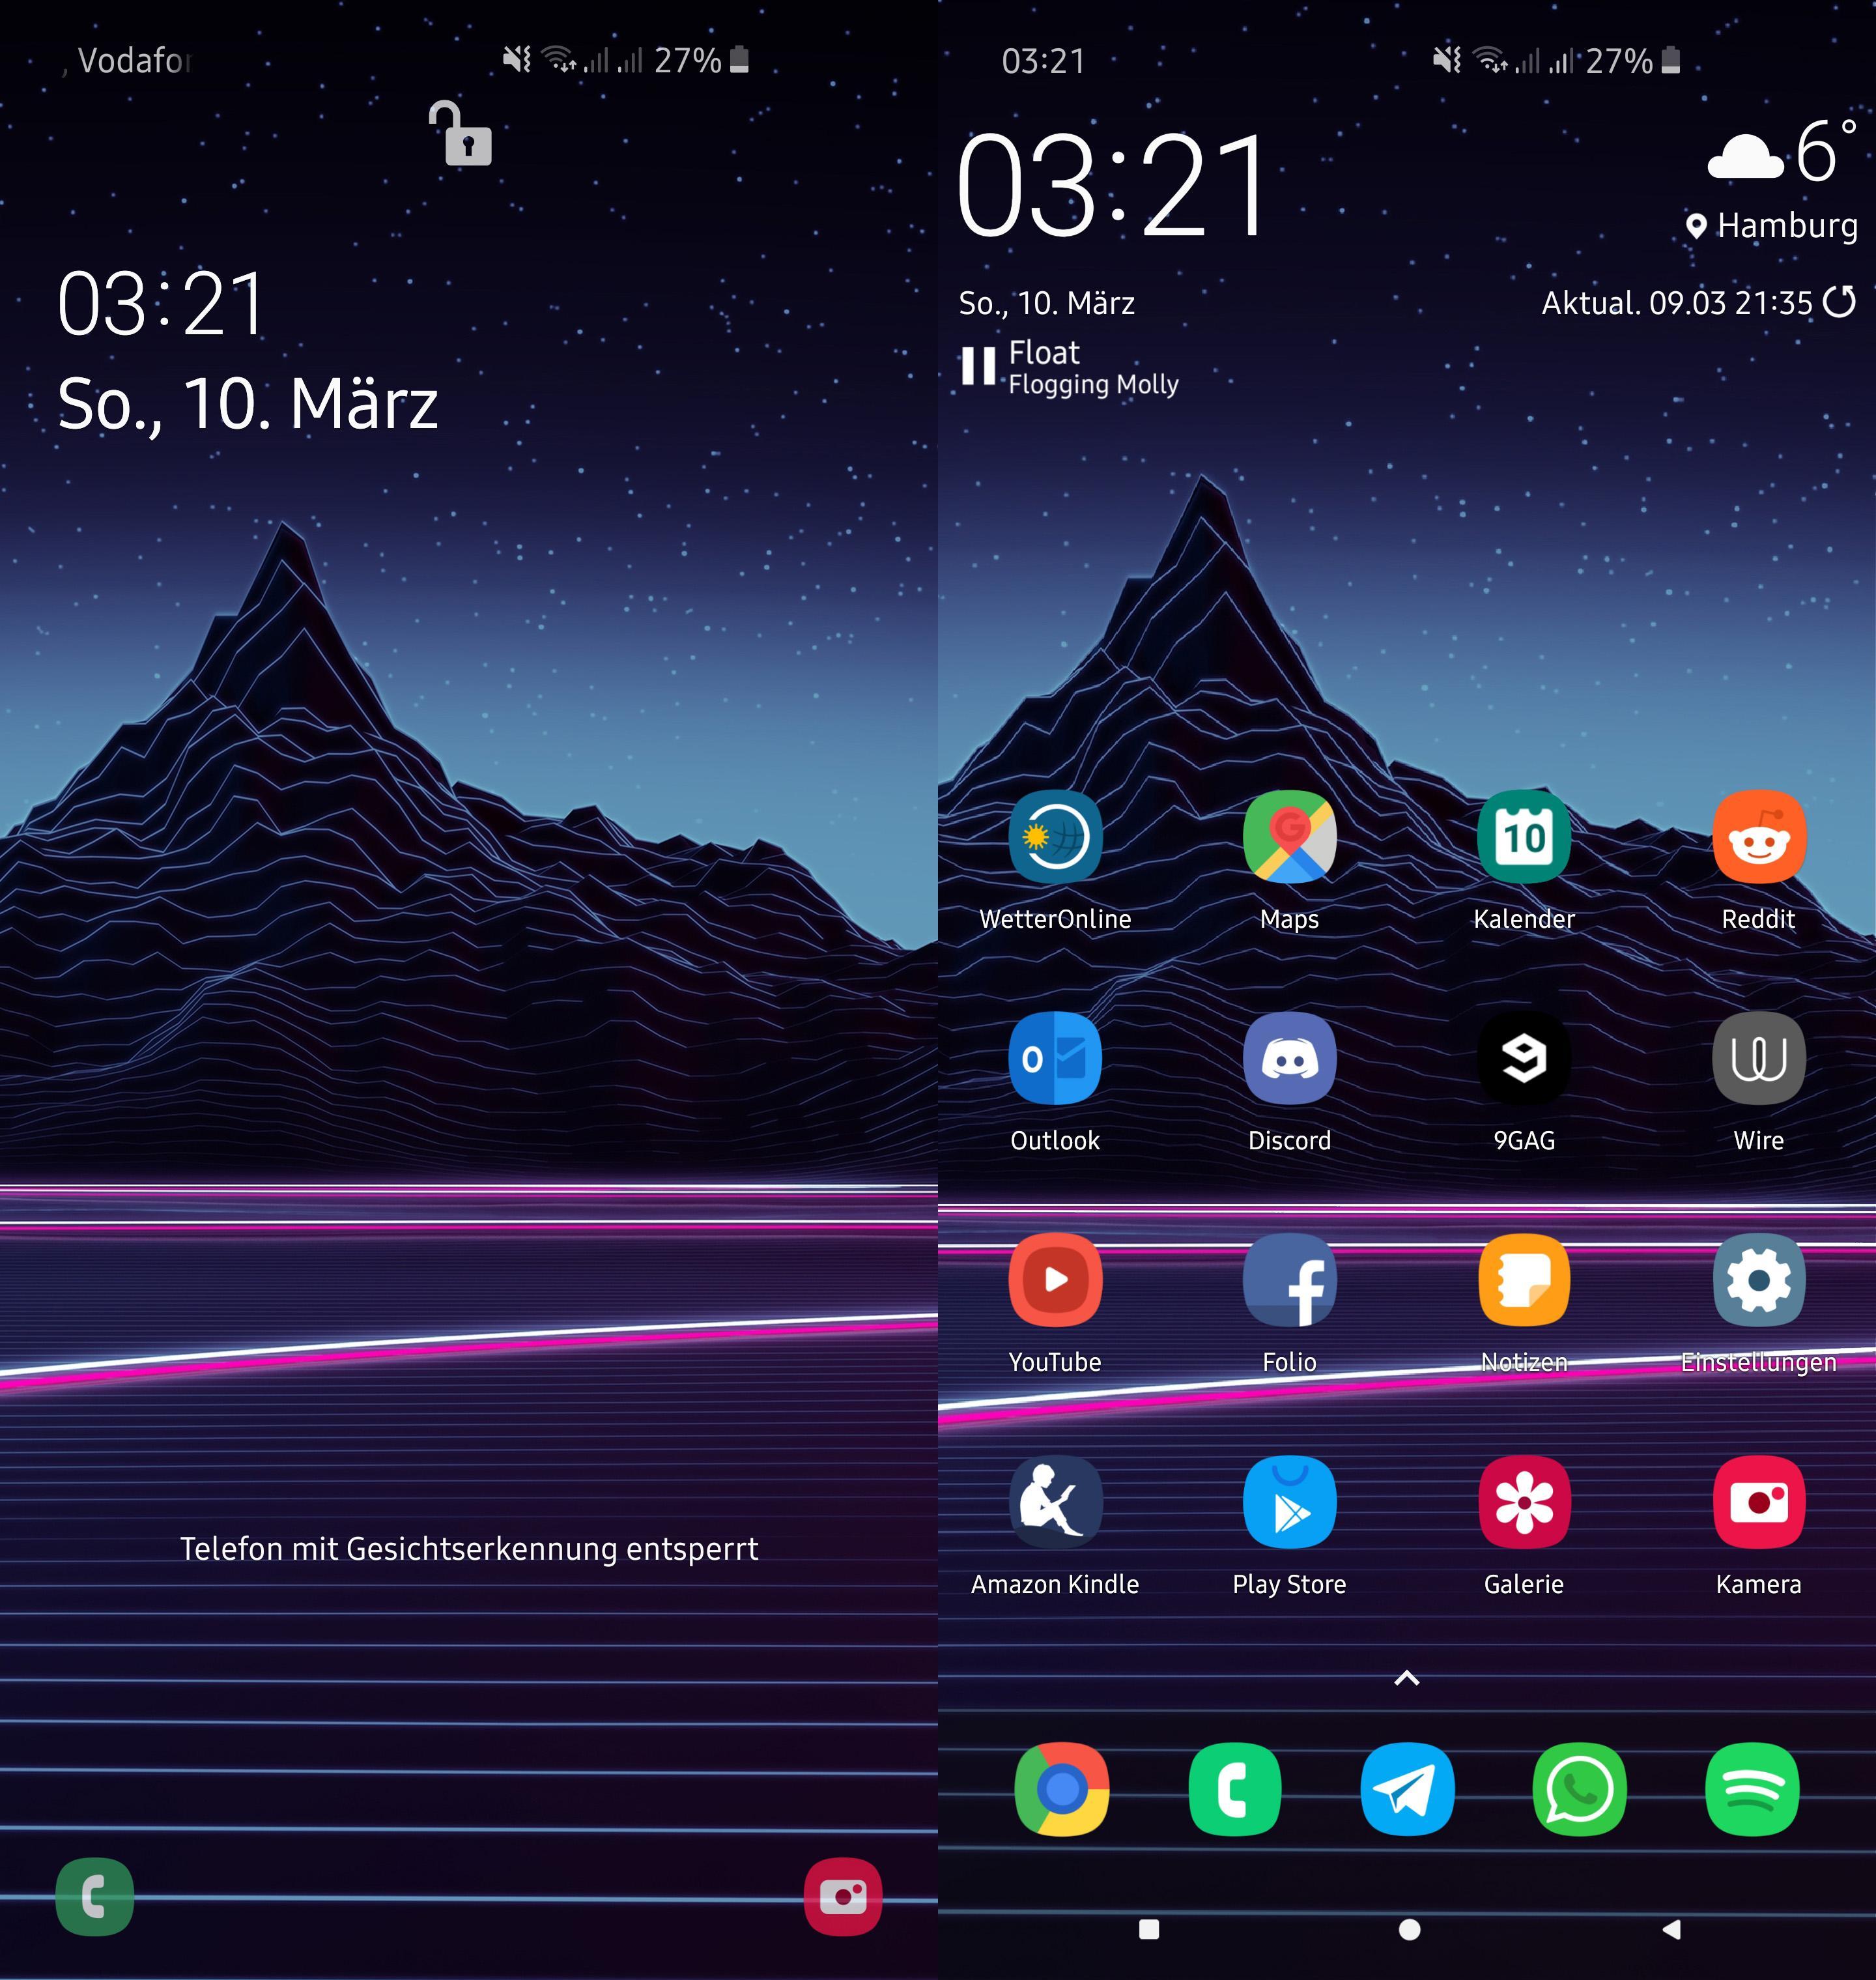 Wallpaper Zoomed In With Nova Launcher Xda Forums